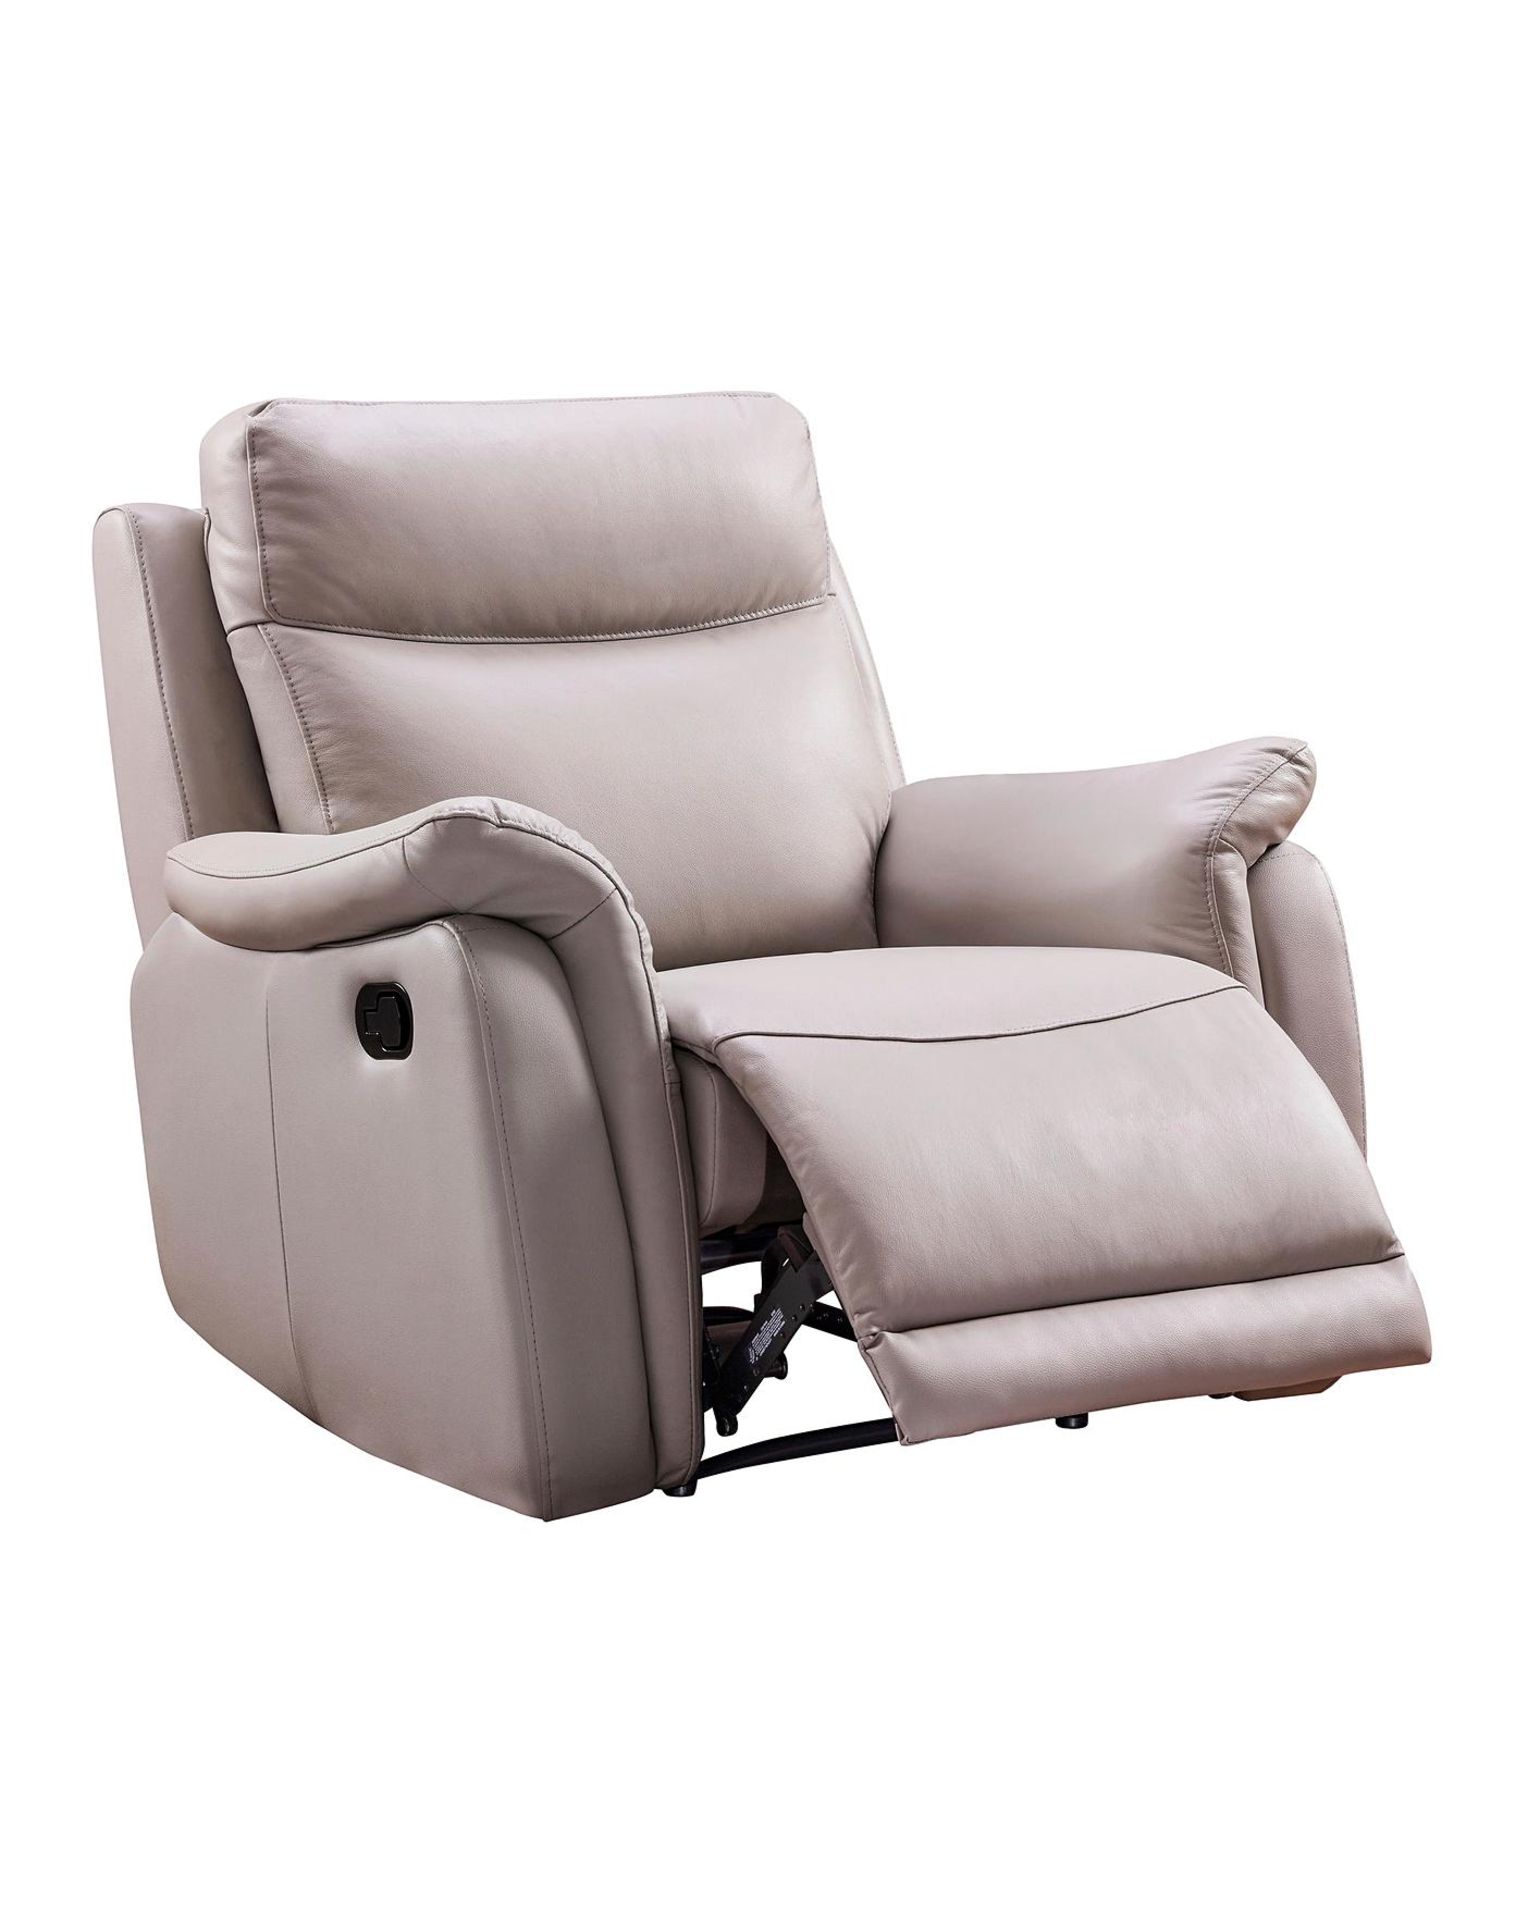 BRAND NEW CHARCOAL ONE SEATER WOTH RECLINER LUXURY SEAT R18-5